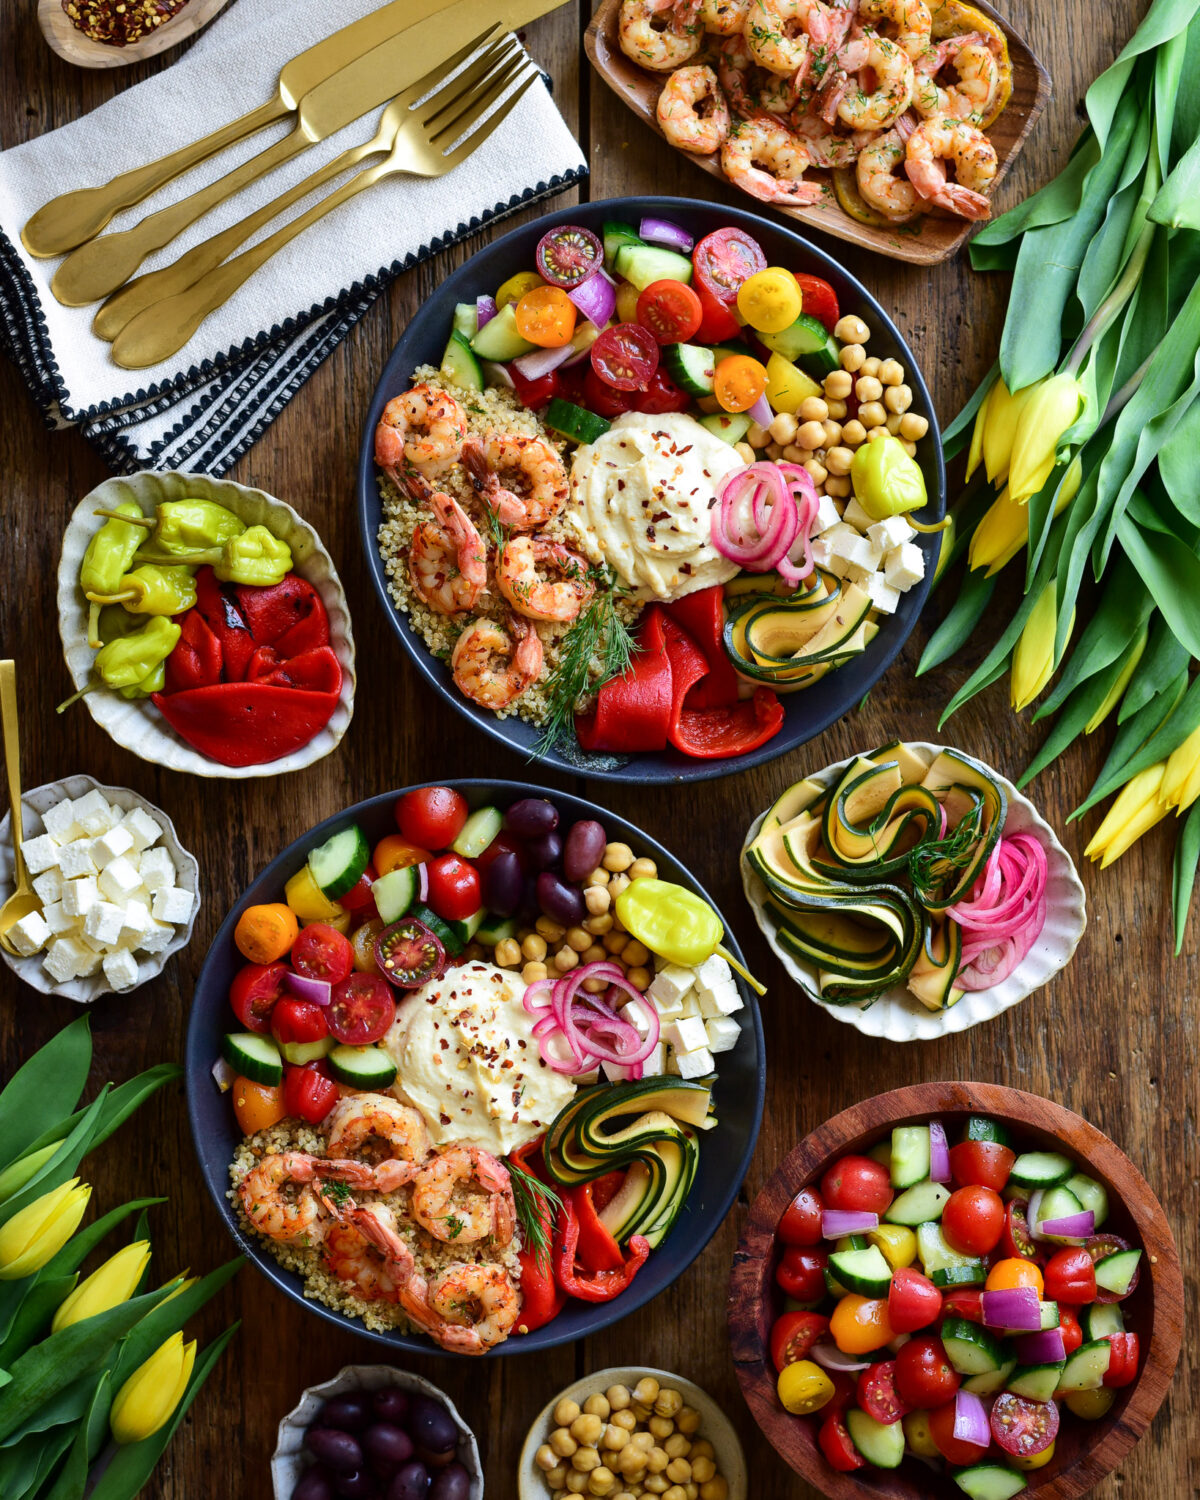 Sheet Pan Lemon Garlic Shrimp Bowls served with extra toppings on the side.